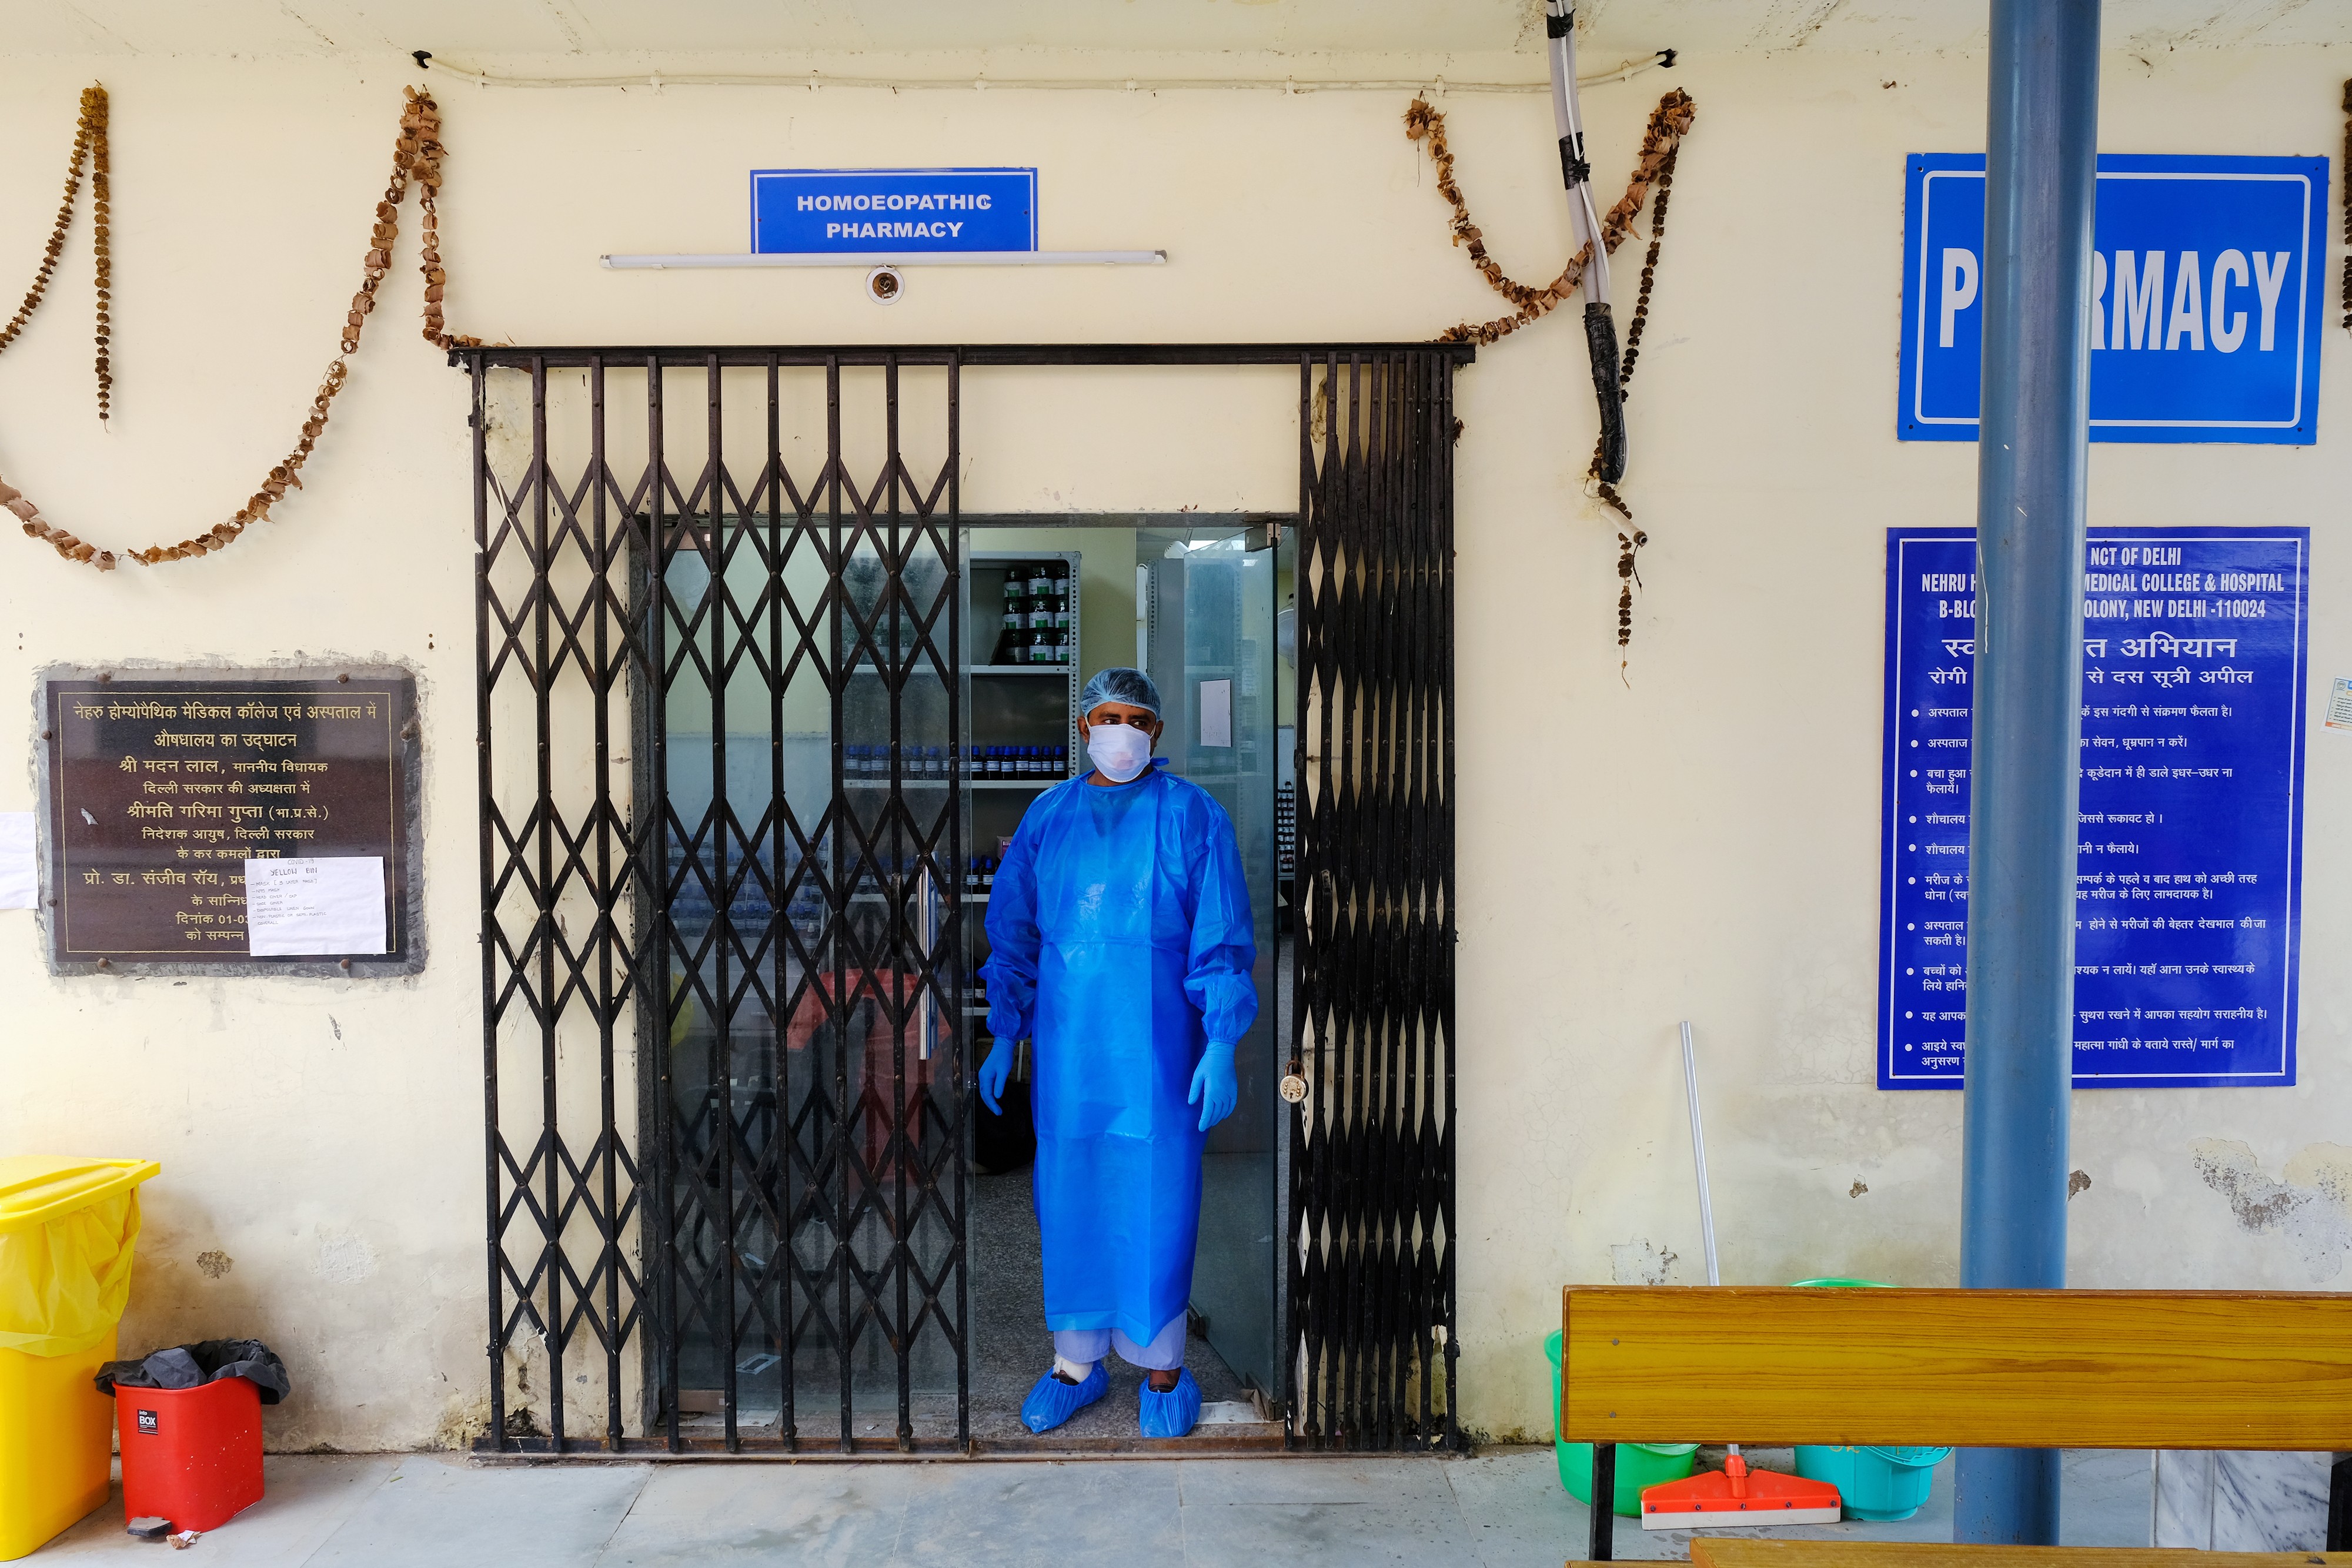 A health worker wearing personal protective equipment stands in a doorway at a COVID-19 testing center.